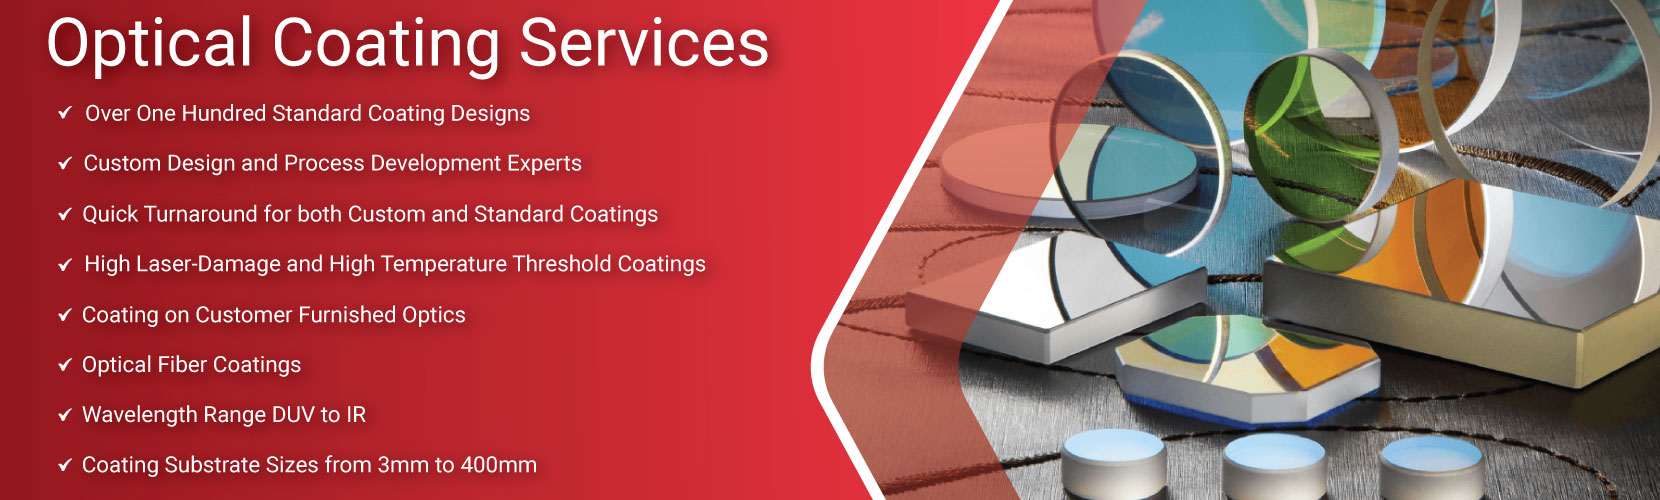 coatings-page-banner